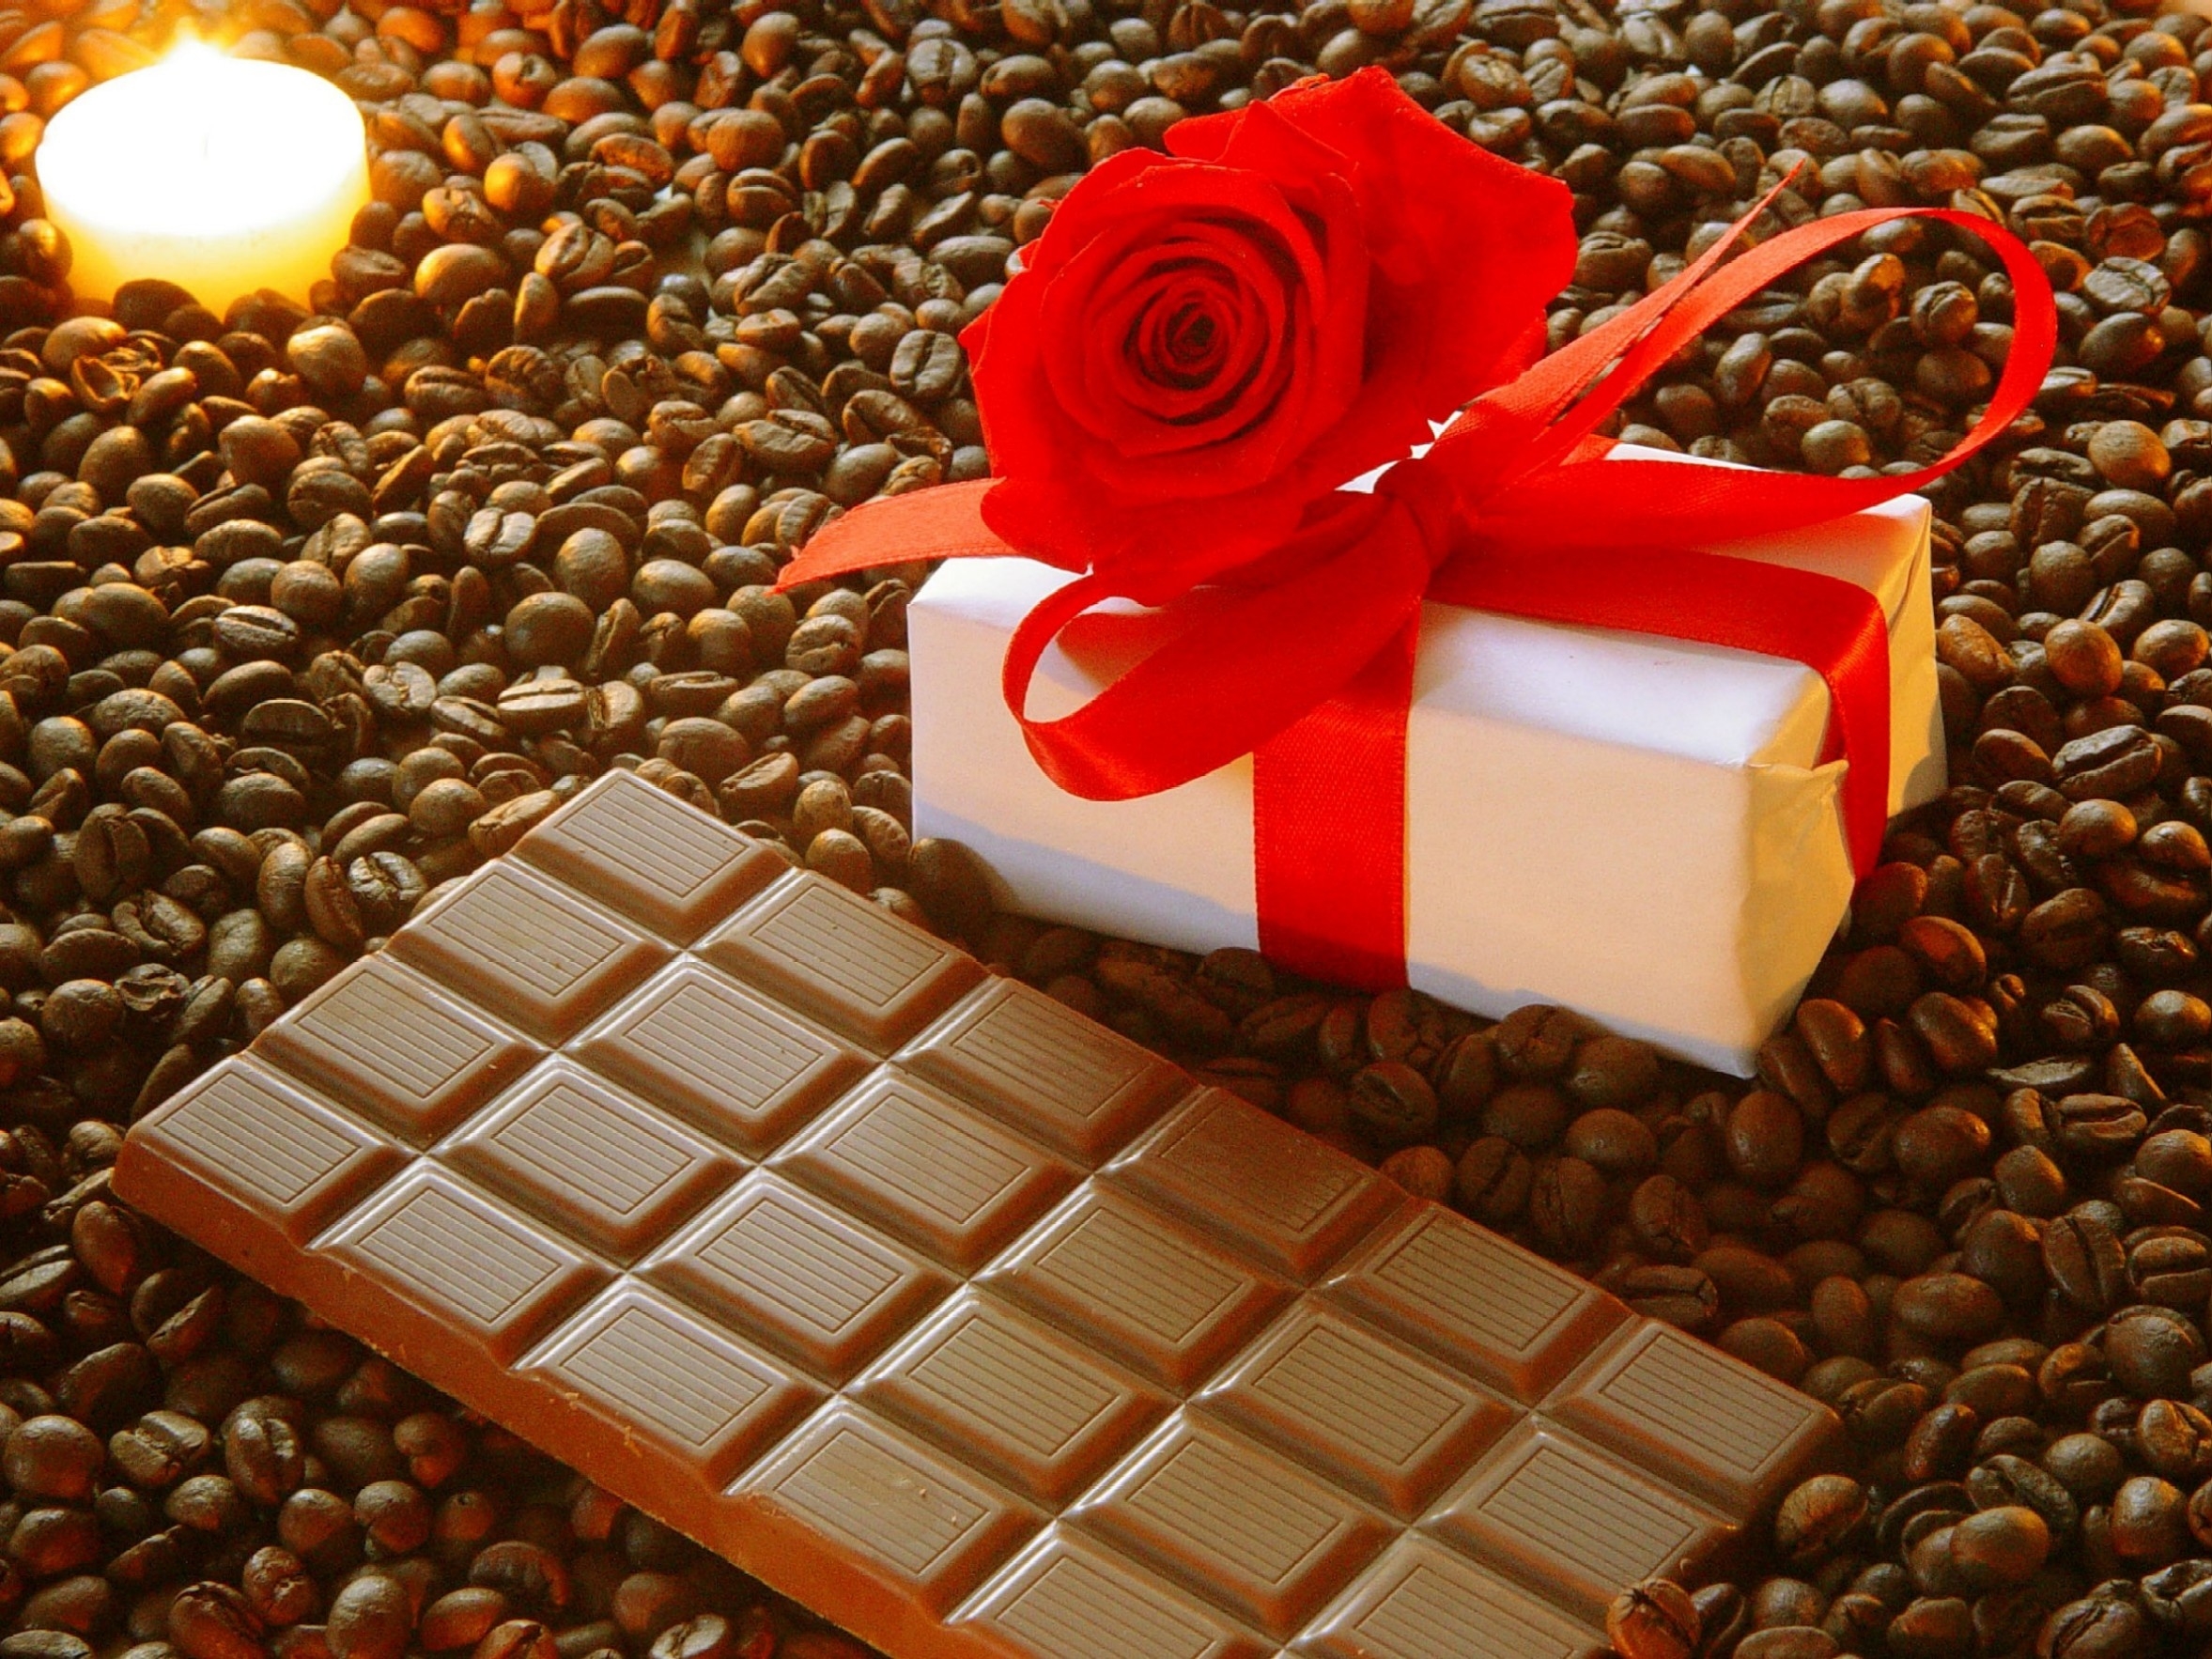 romance, food, chocolate, coffee, rose flower, rose, holiday, present, gift, bow, grains, candle, grain